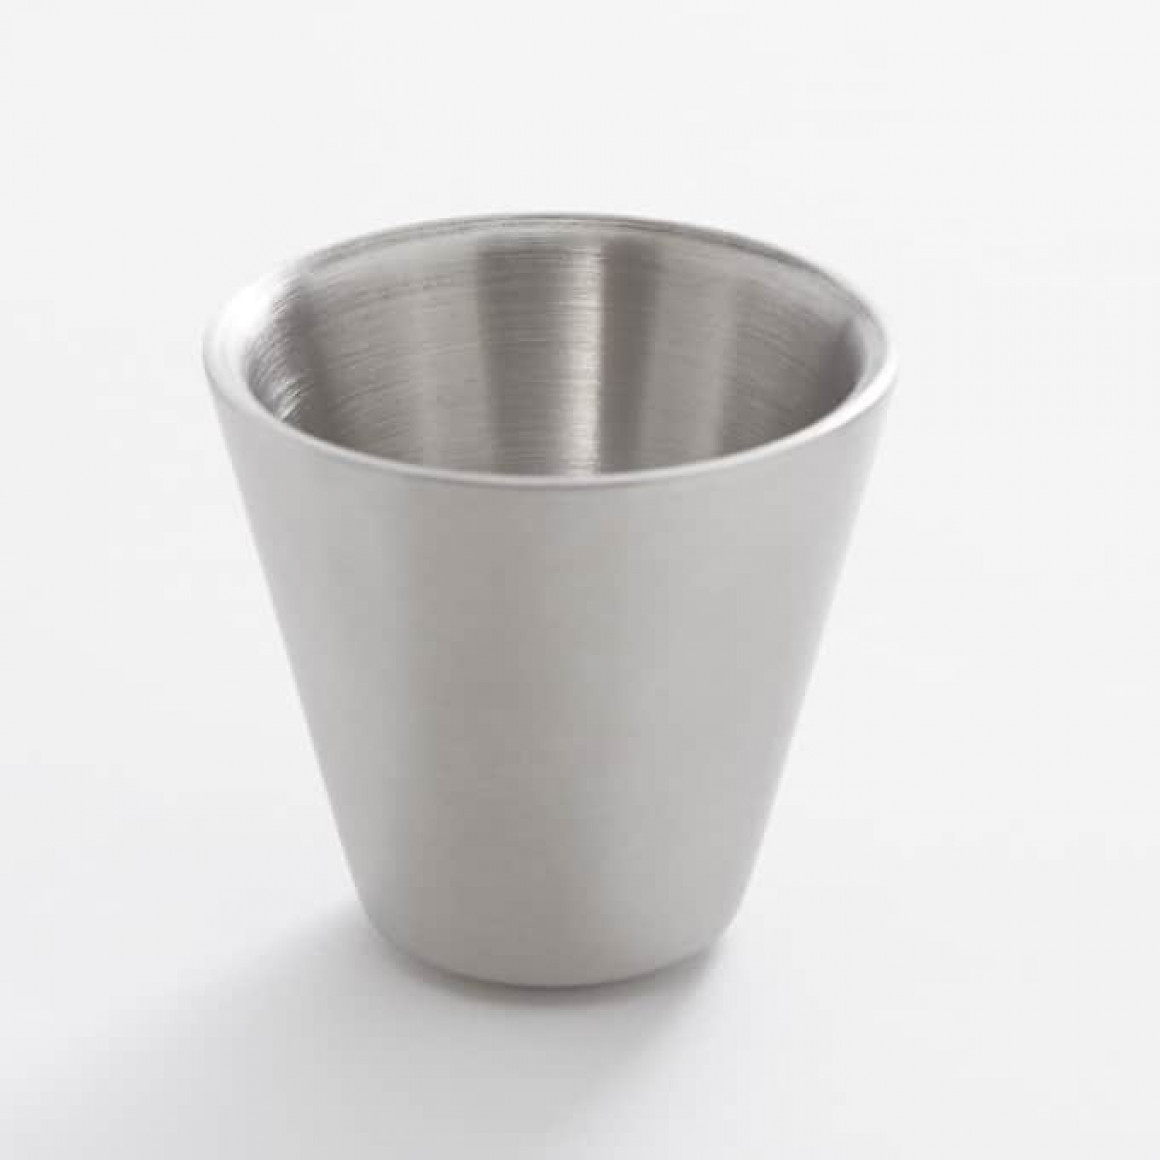 SAUCE CUP, STAINLESS STEEL, DOUBLE WALL, 3 OZ.